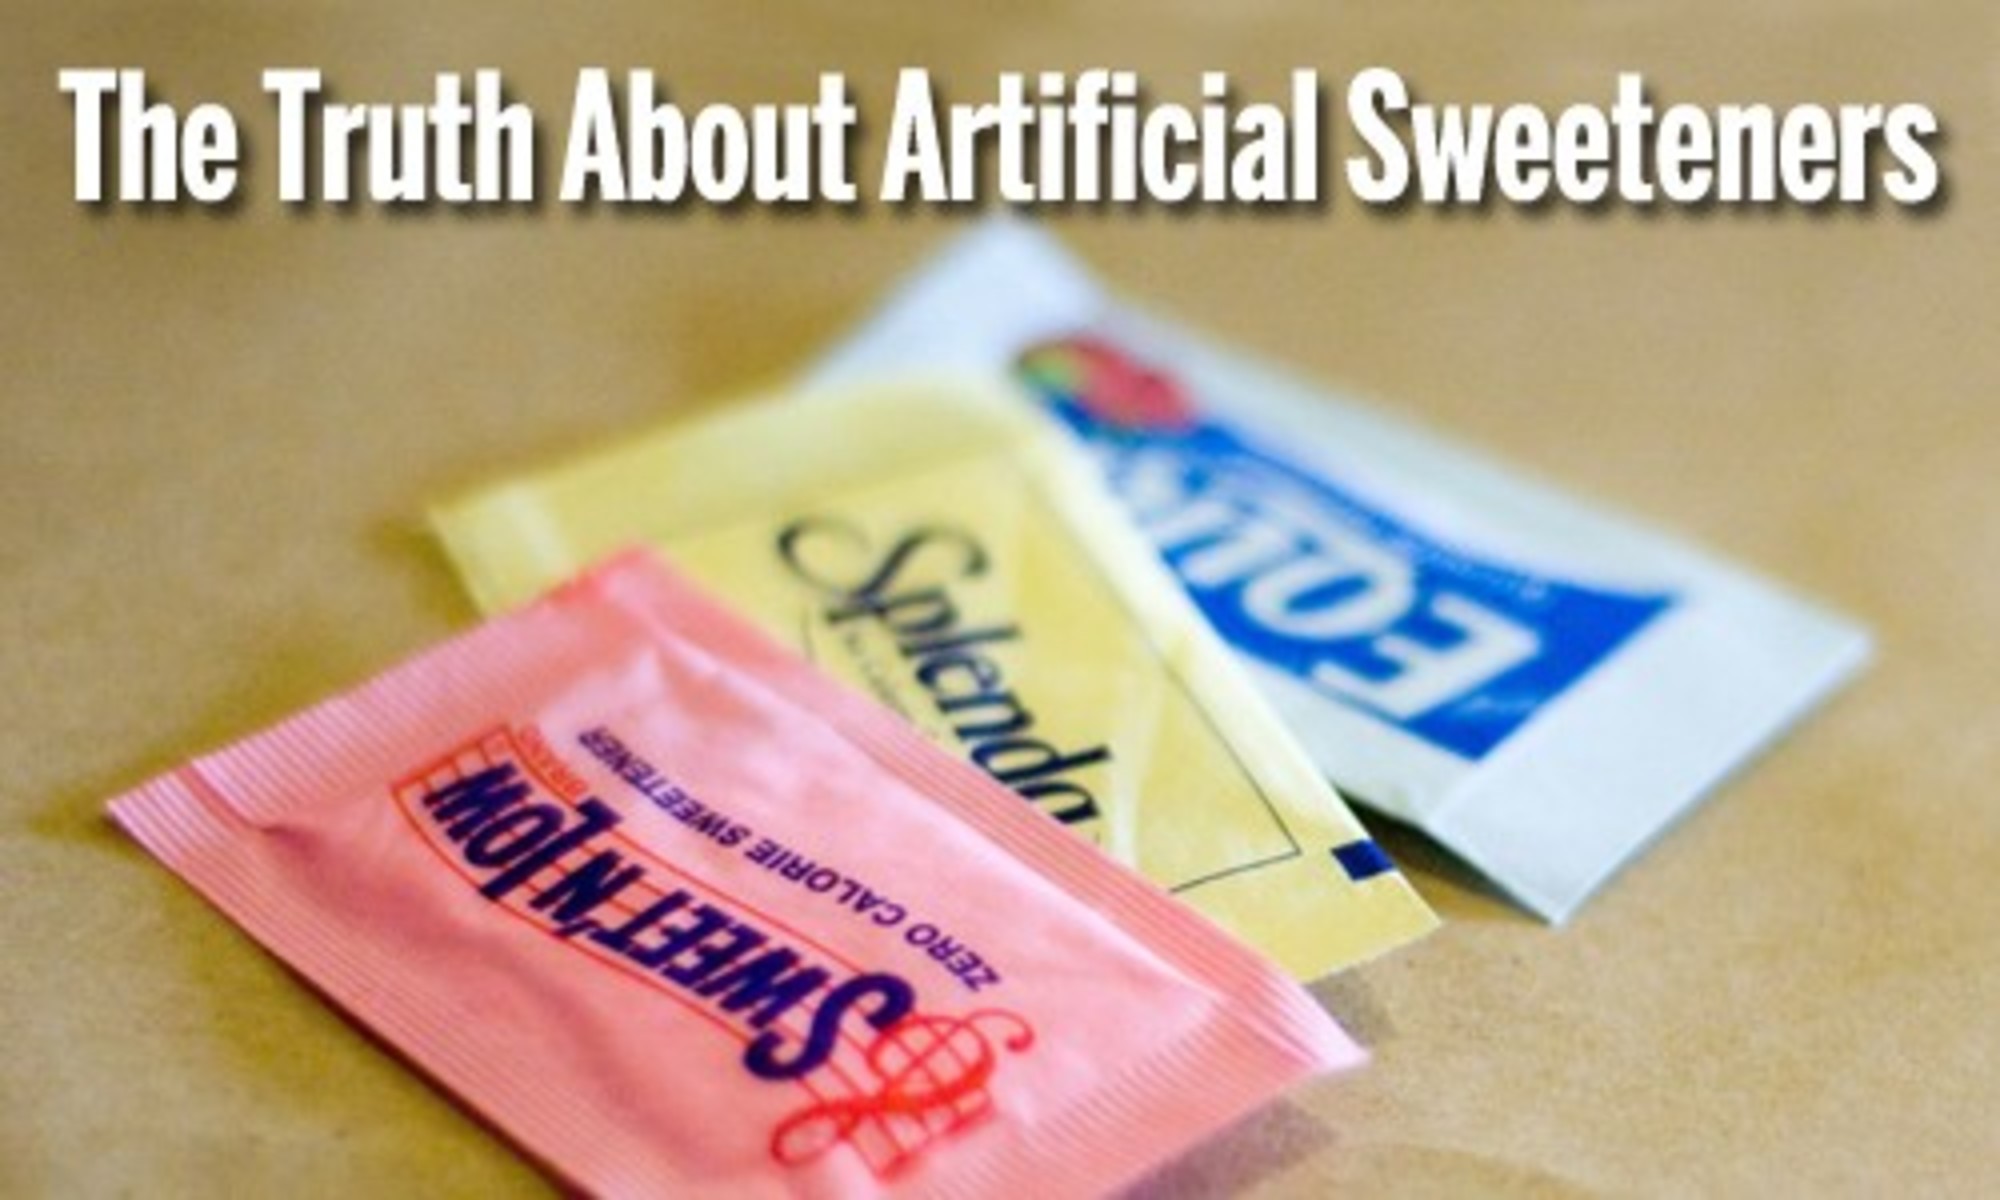 The Truth About Artificial Sweeteners